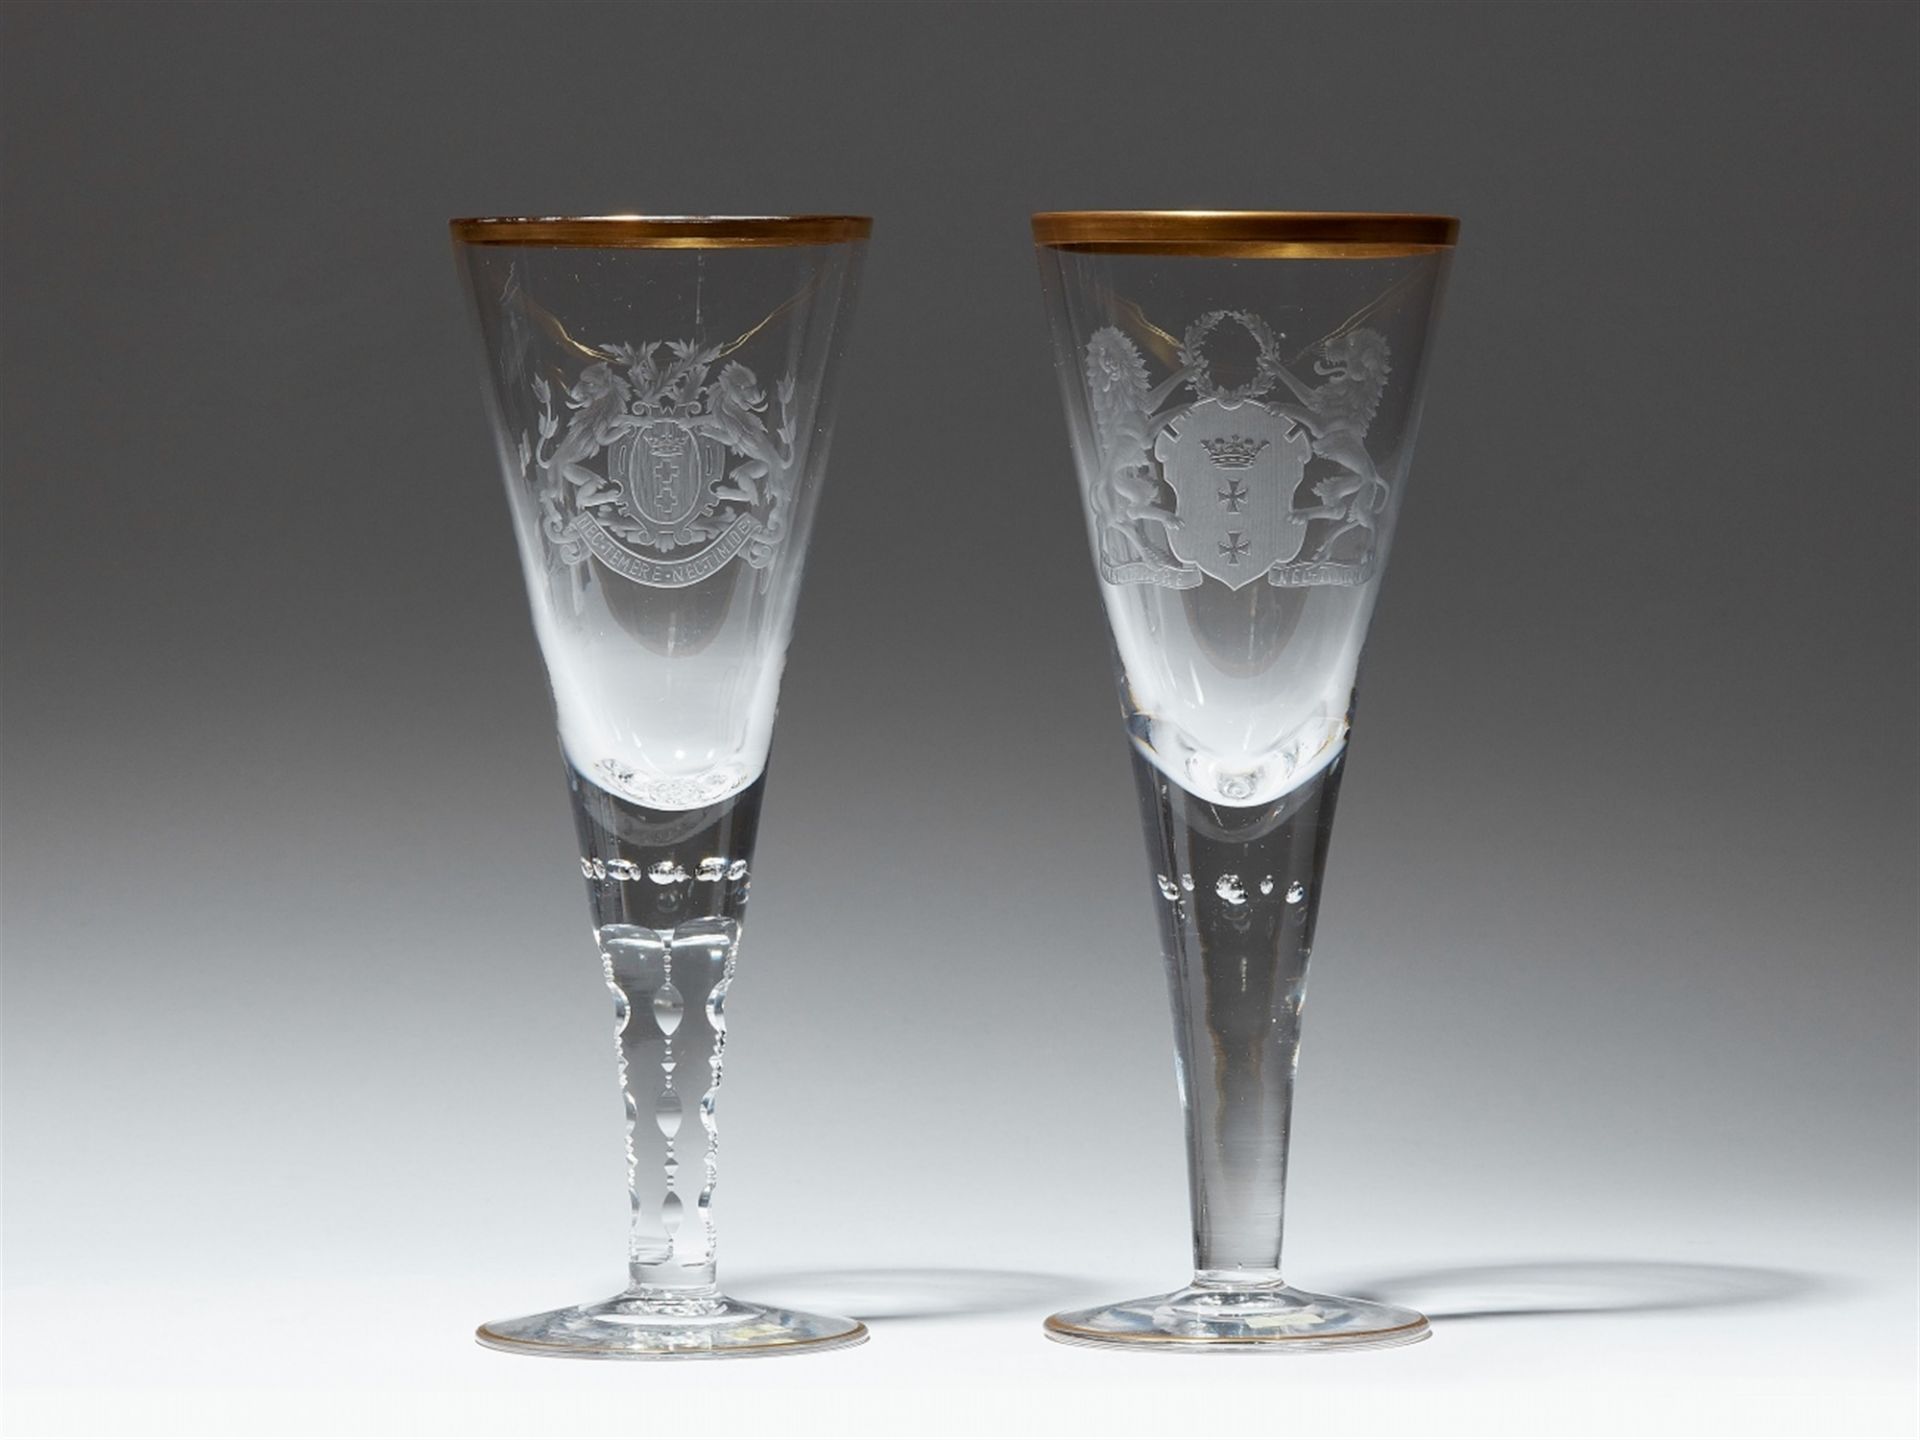 Two cut and wheel engraved glass goblets with the coat of arms of Gdansk